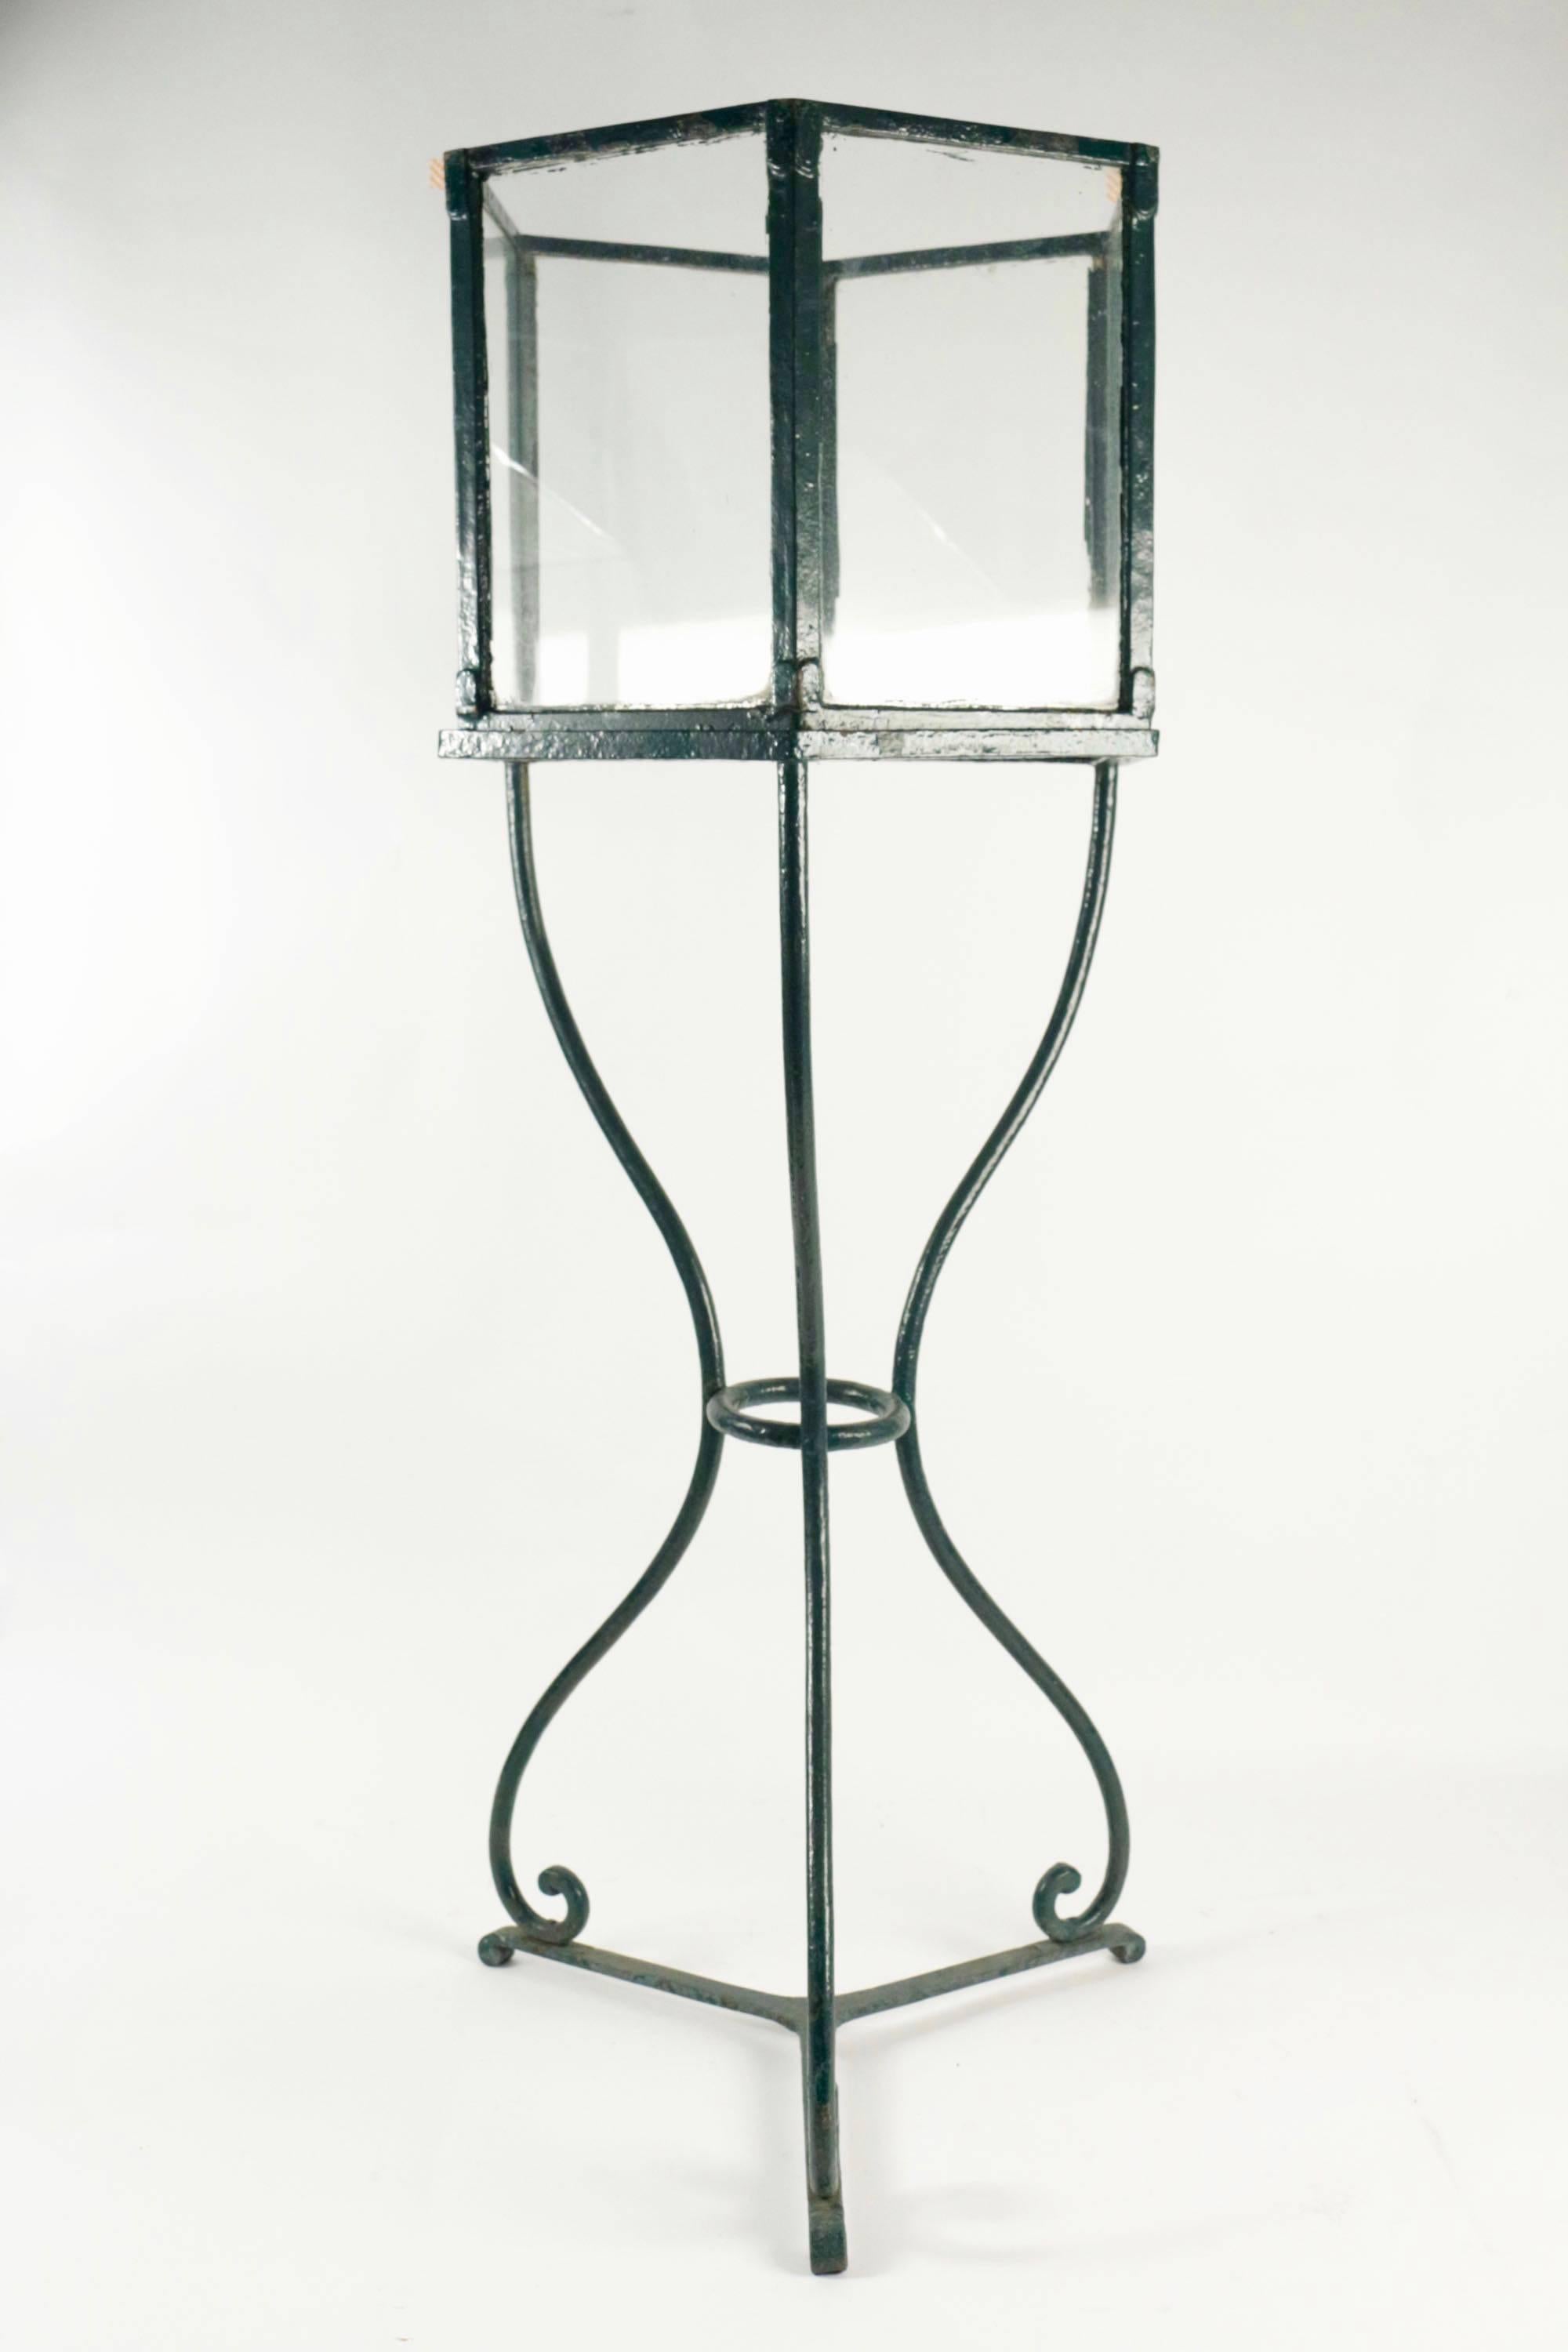 1940s wrought iron Jardin d'Hiver conservatory set.

This set have been purchased by his previous owner at the Madeleine Castaing shop, Jacob street, Paris, in 1950s.

The set is composed by three pieces:

One high hexagonal aquarium with glass